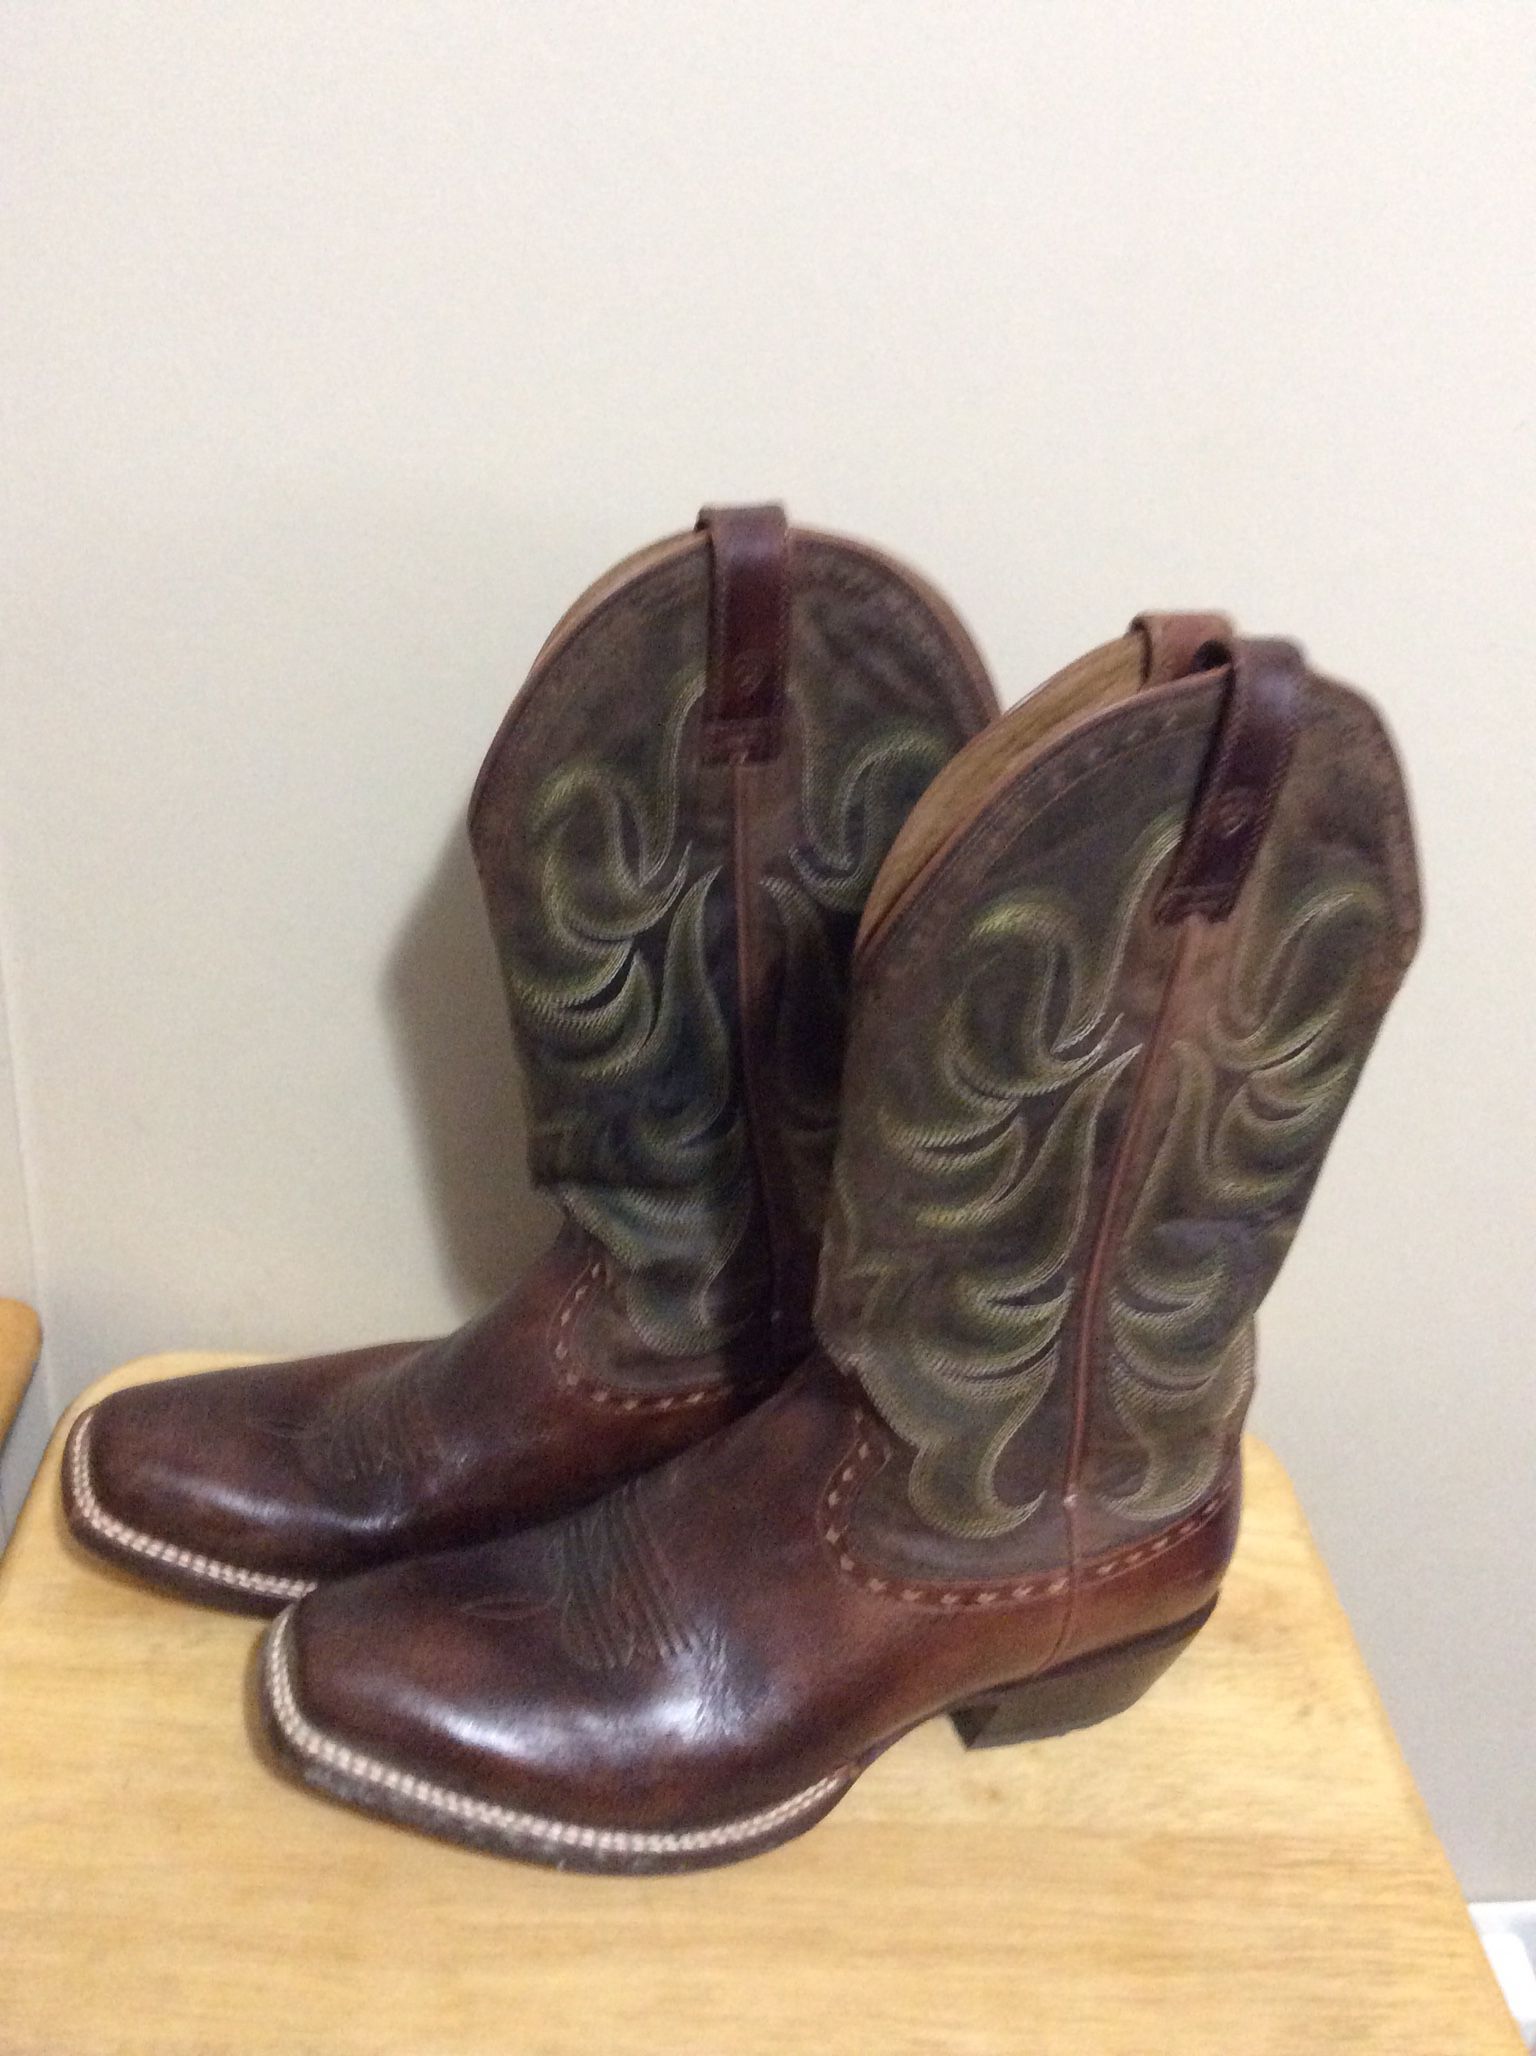 A PAIR OF MENS PRE OWNED BROWN ARIAT BRAND COWBOY BOOTS- Cond. VG